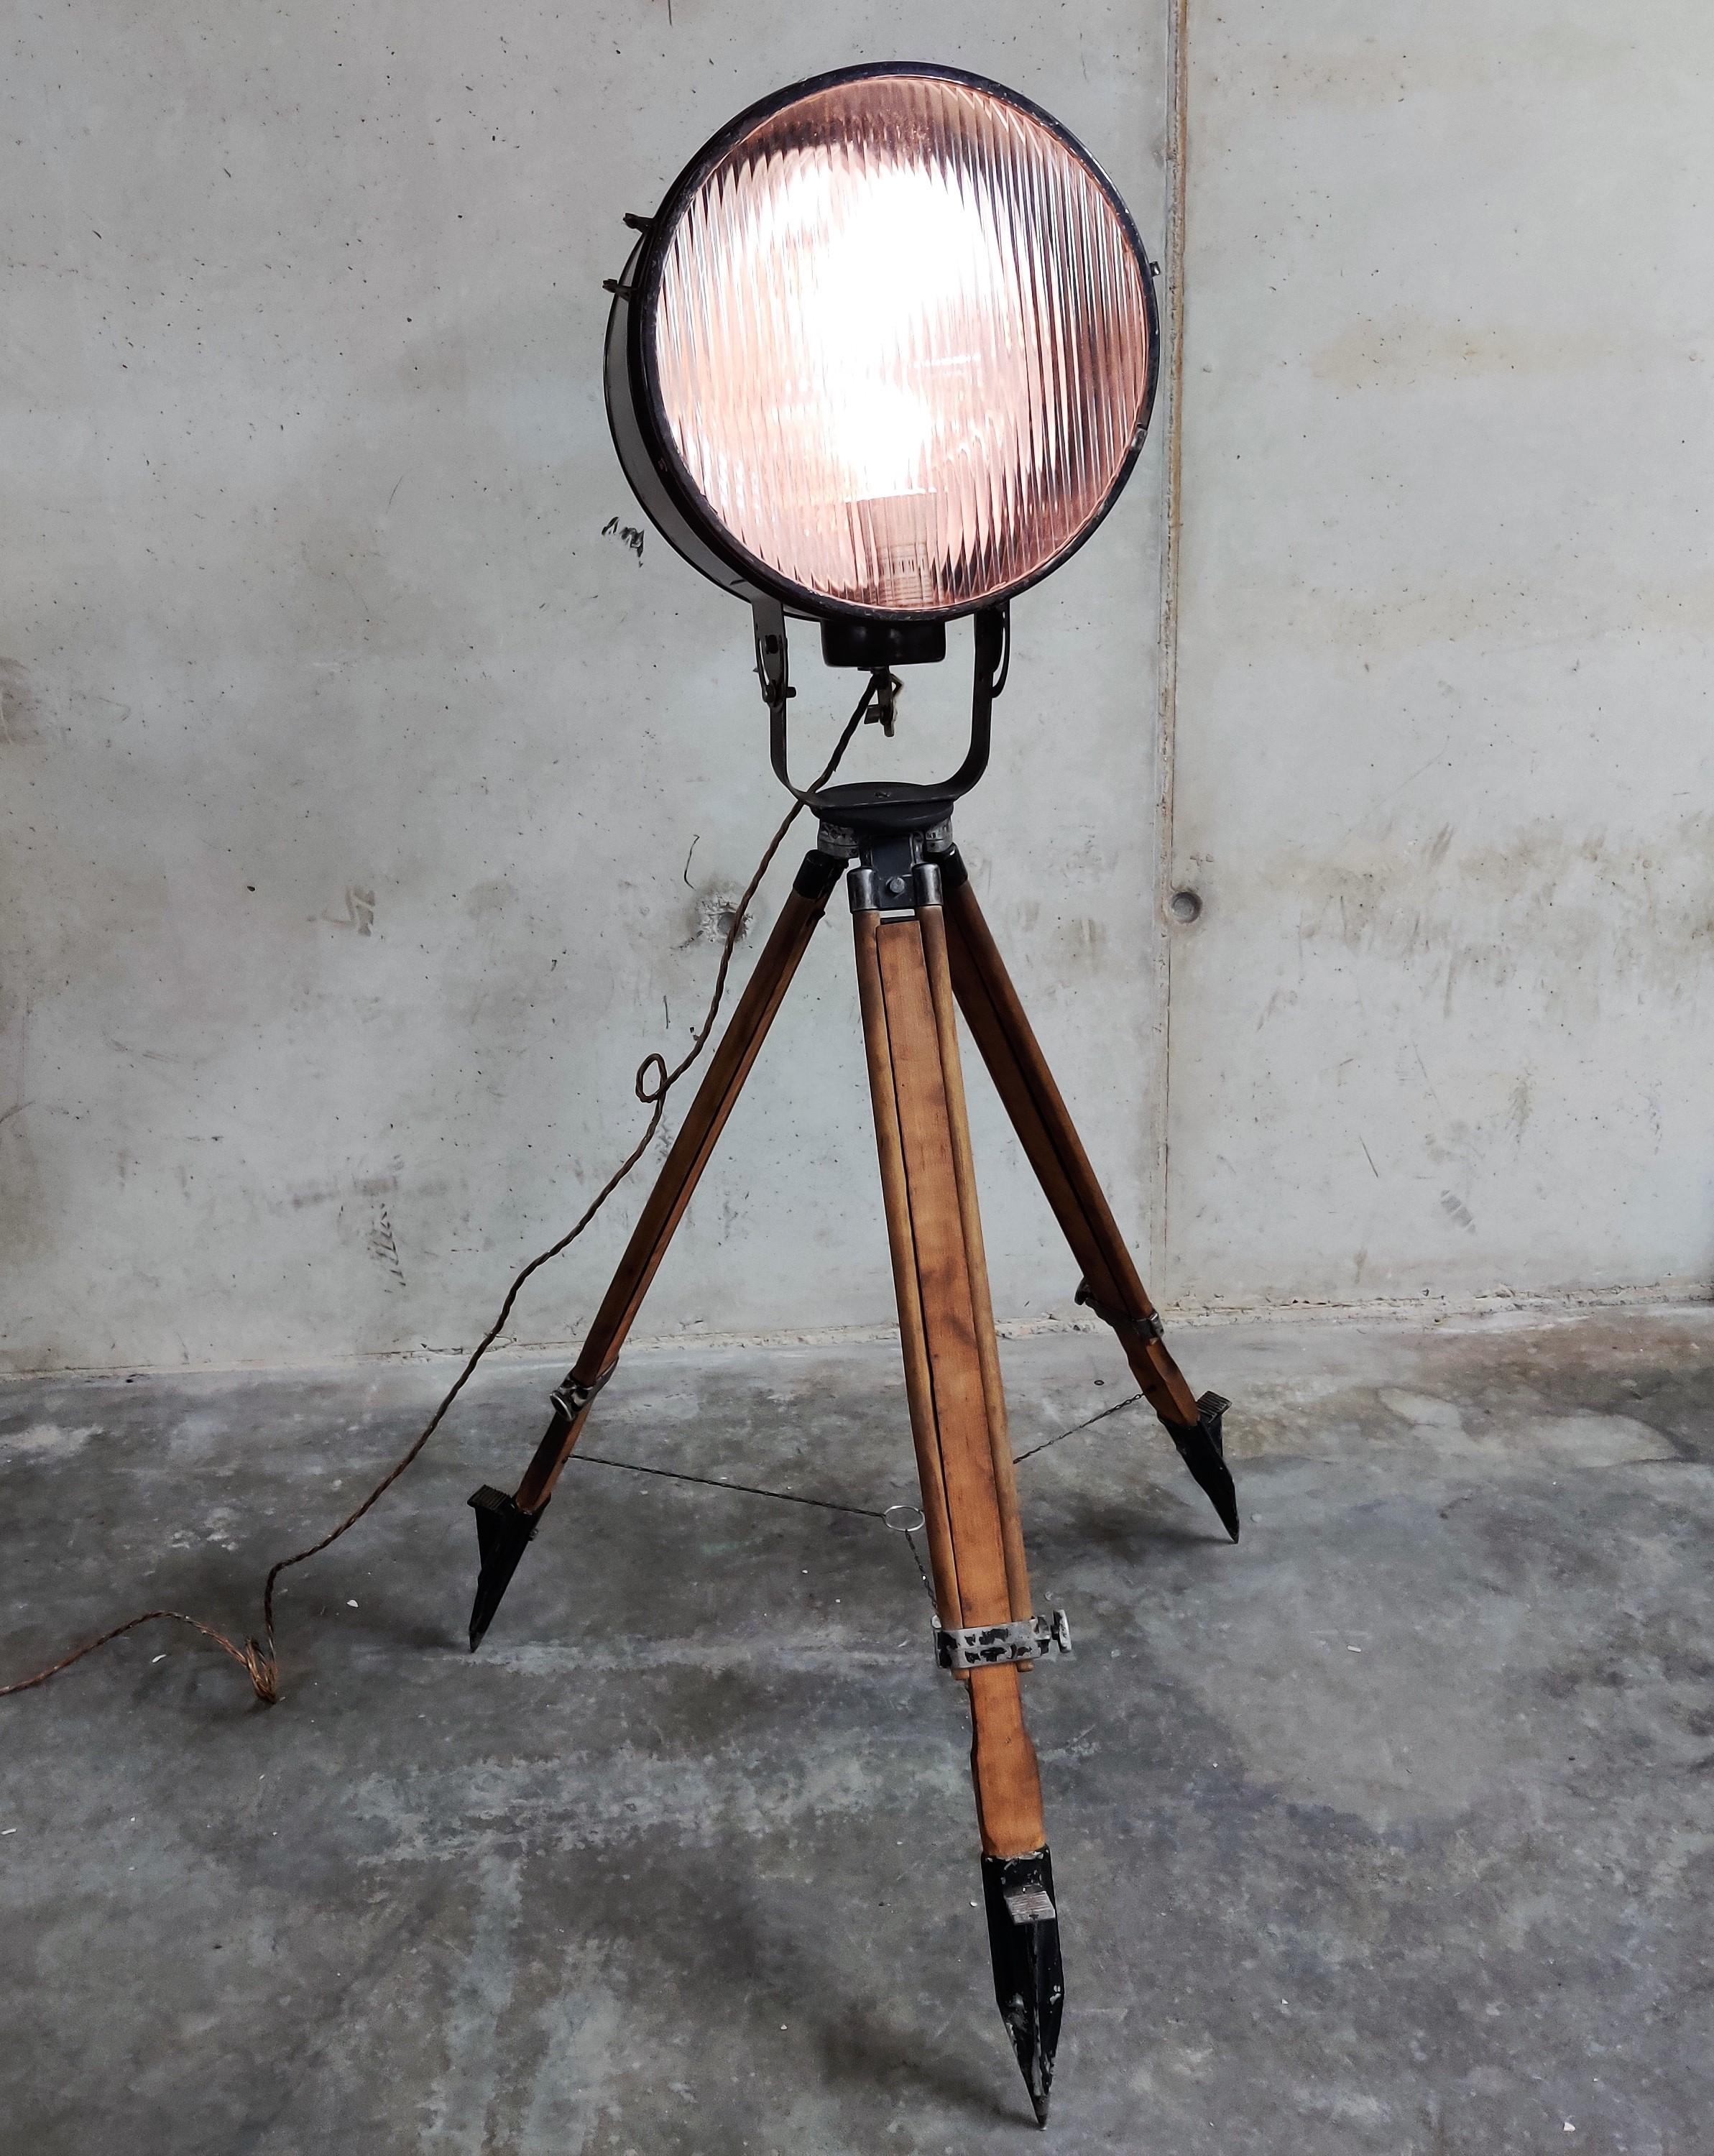 Wonderful industrial spotlight, coming from a ship.

The light has a reflector on the inside and ribbled glass, creating a diffuse light.

The lamp is mounted on a vintage wooden tripod, adjustable in height.

This floor lamp is a real eye